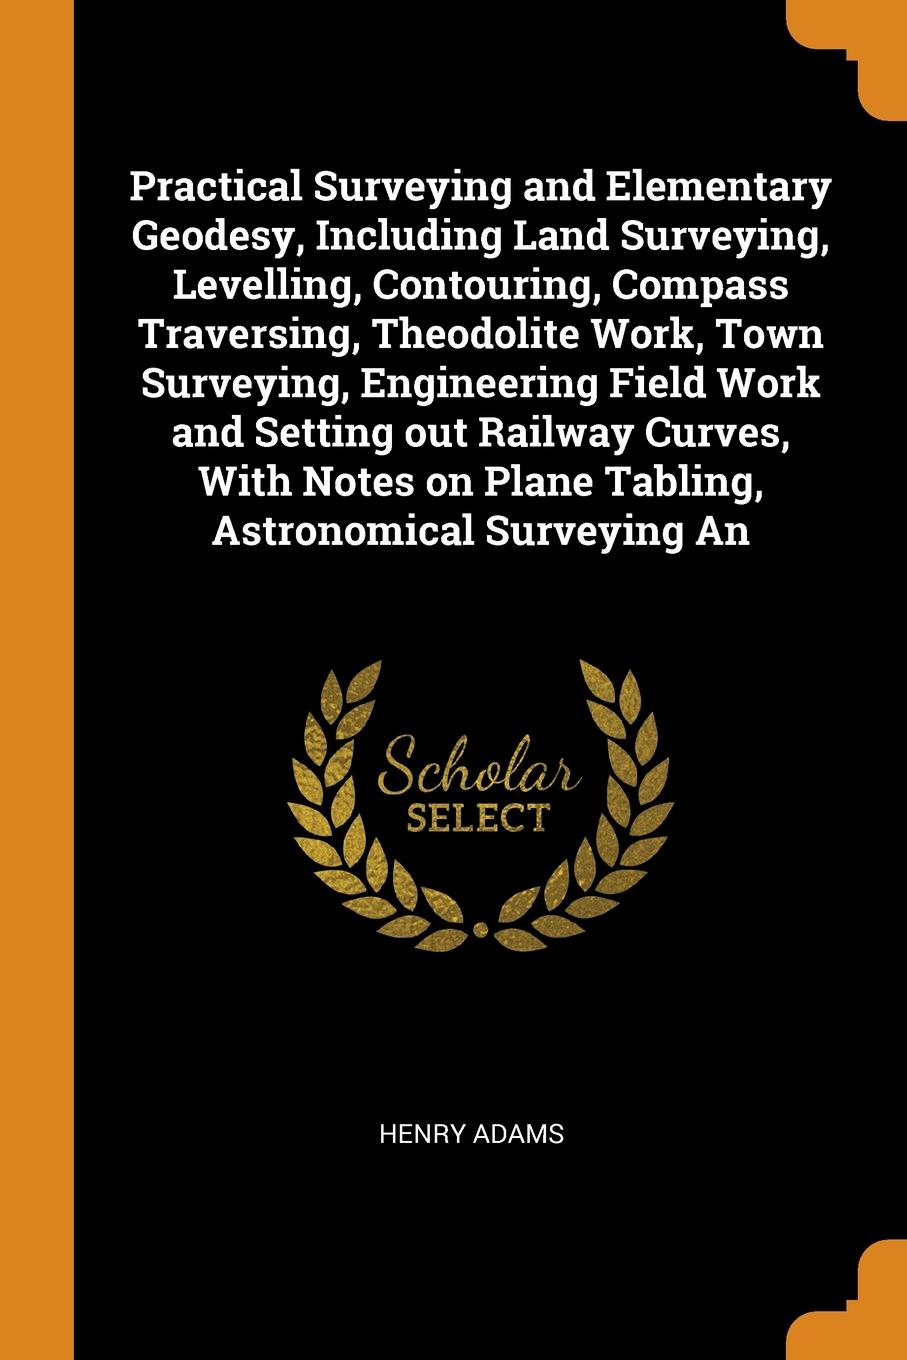 Practical Surveying and Elementary Geodesy, Including Land Surveying, Levelling, Contouring, Compass Traversing, Theodolite Work, Town Surveying, Engineering Field Work and Setting out Railway Curves, With Notes on Plane Tabling, Astronomical Surv...